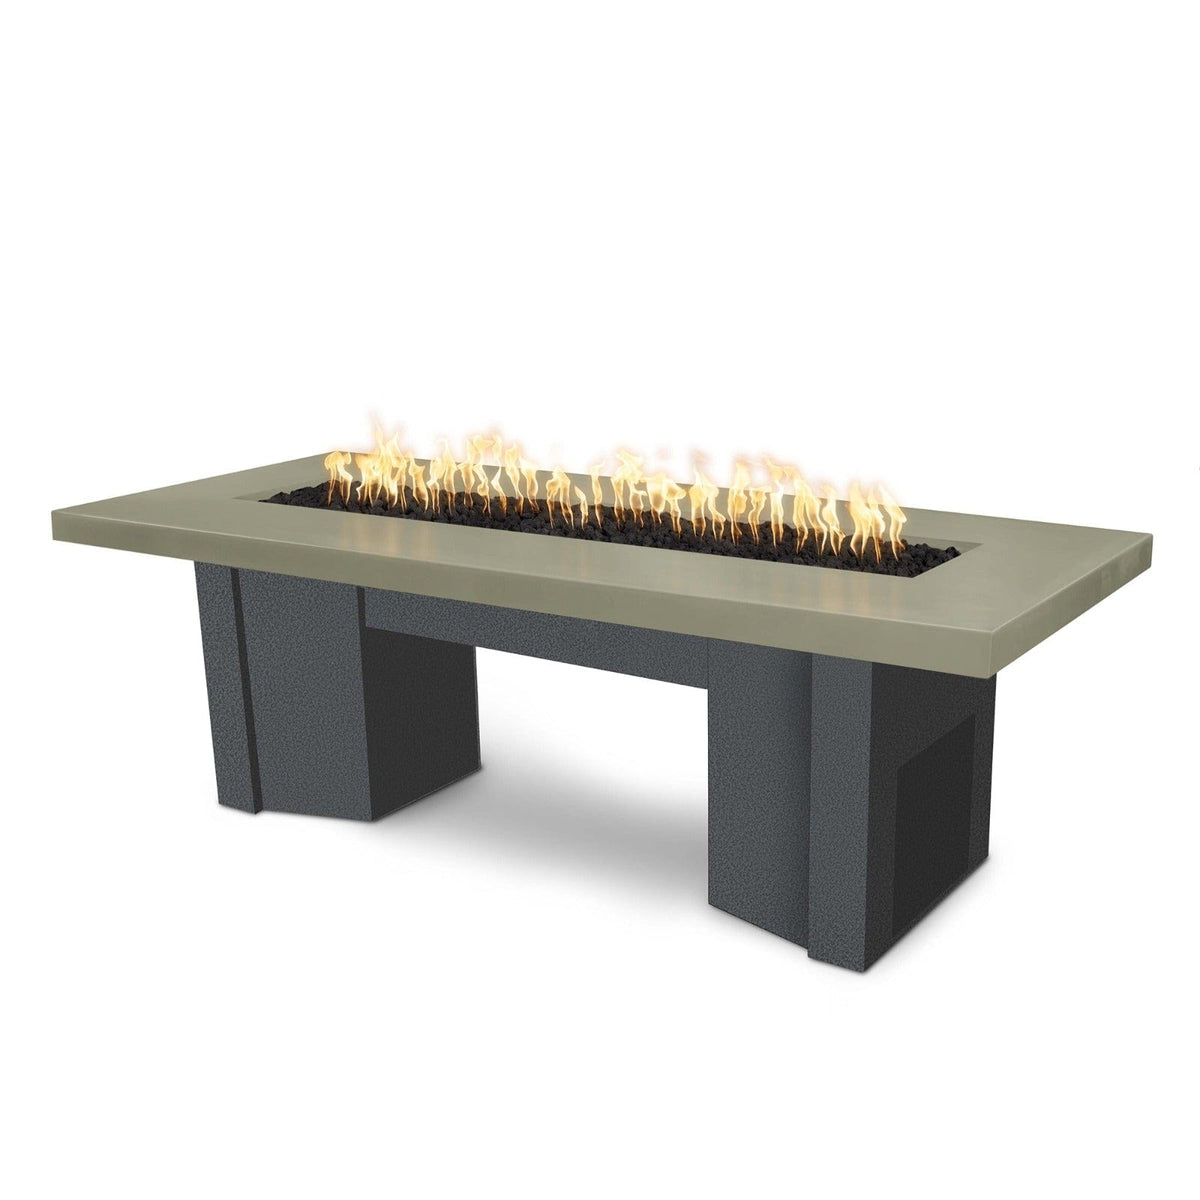 The Outdoor Plus Fire Features Ash (-ASH) / Silver Vein Powder Coated Steel (-SLV) The Outdoor Plus 60&quot; Alameda Fire Table Smooth Concrete in Liquid Propane - Match Lit with Flame Sense System / OPT-ALMGFRC60FSML-LP